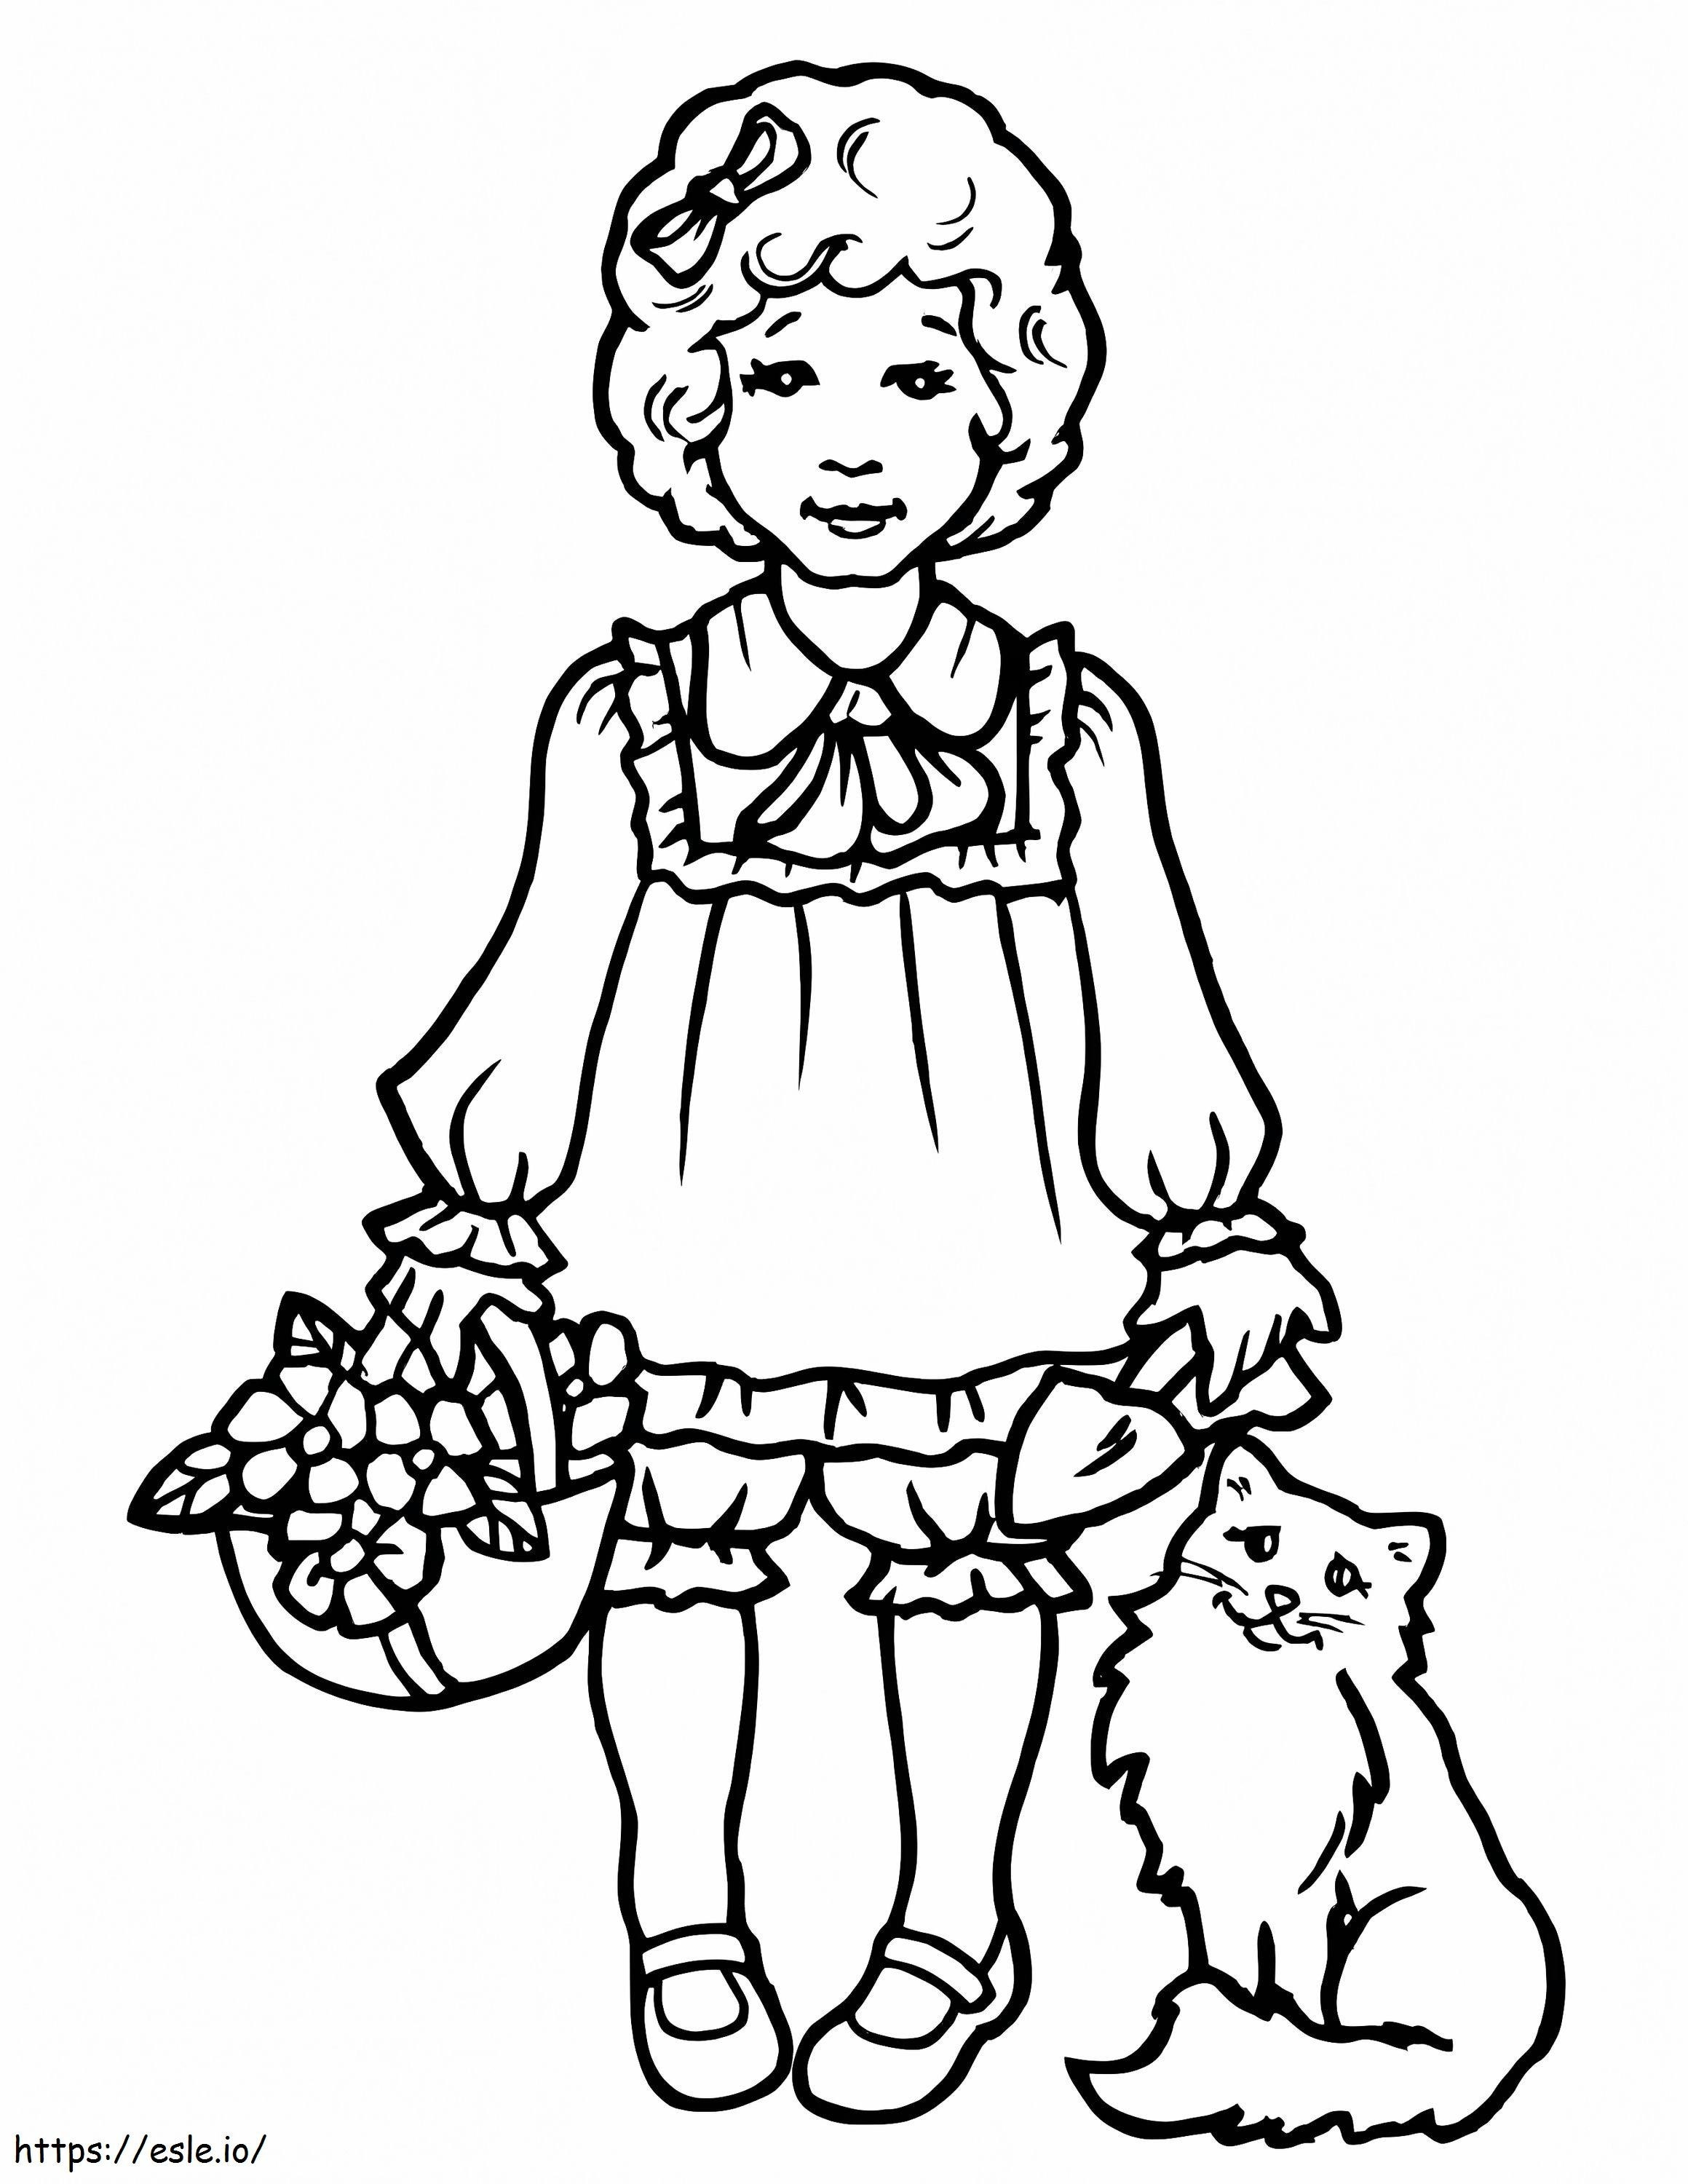 Girl Holding Flower And Cat coloring page